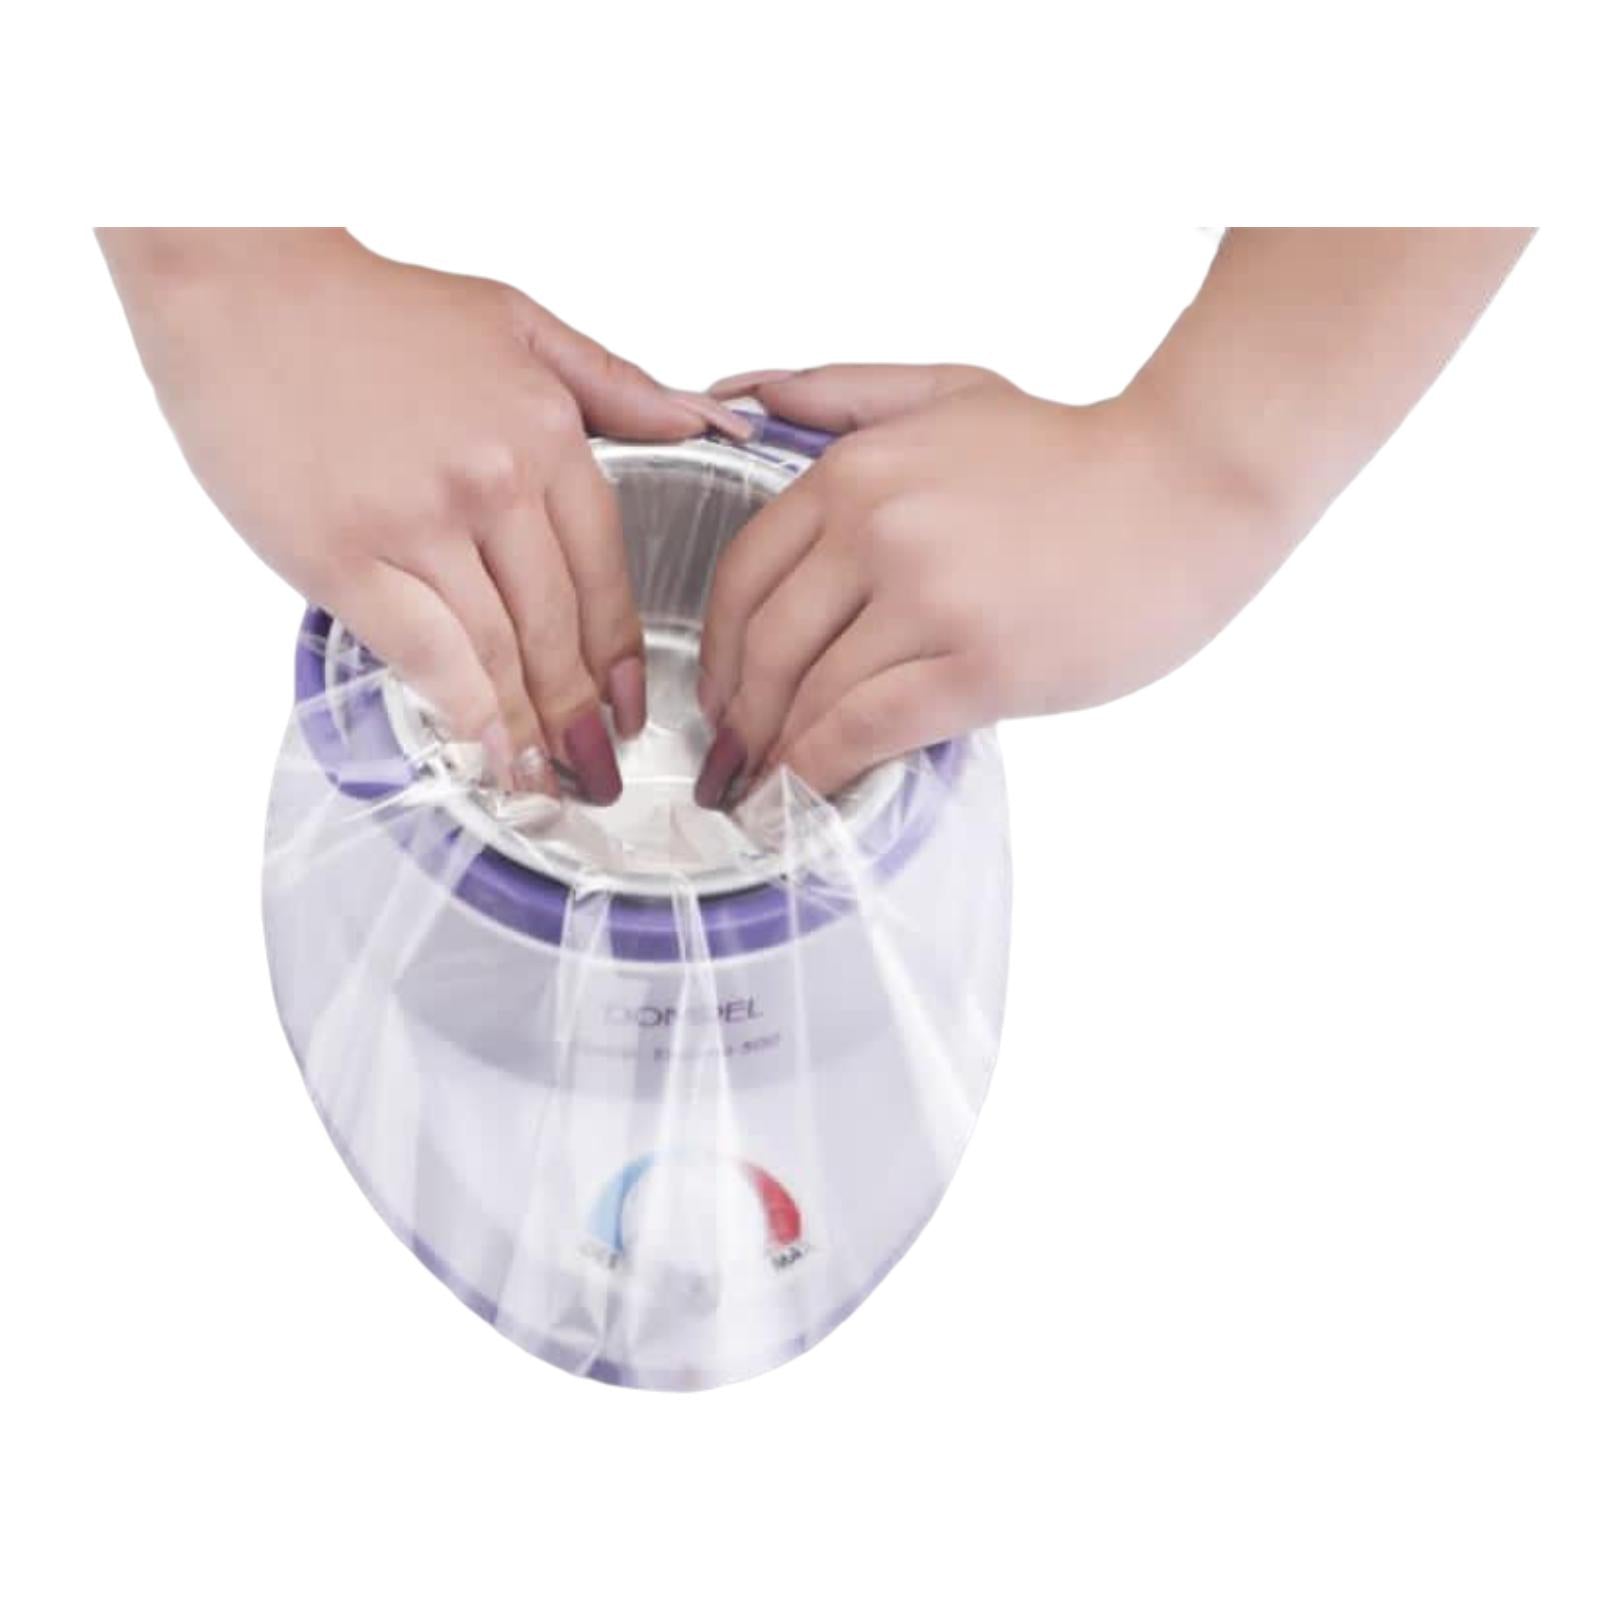 Installing Dompel Plastic Refill in a wax heater, with hands demonstrating the proper method.